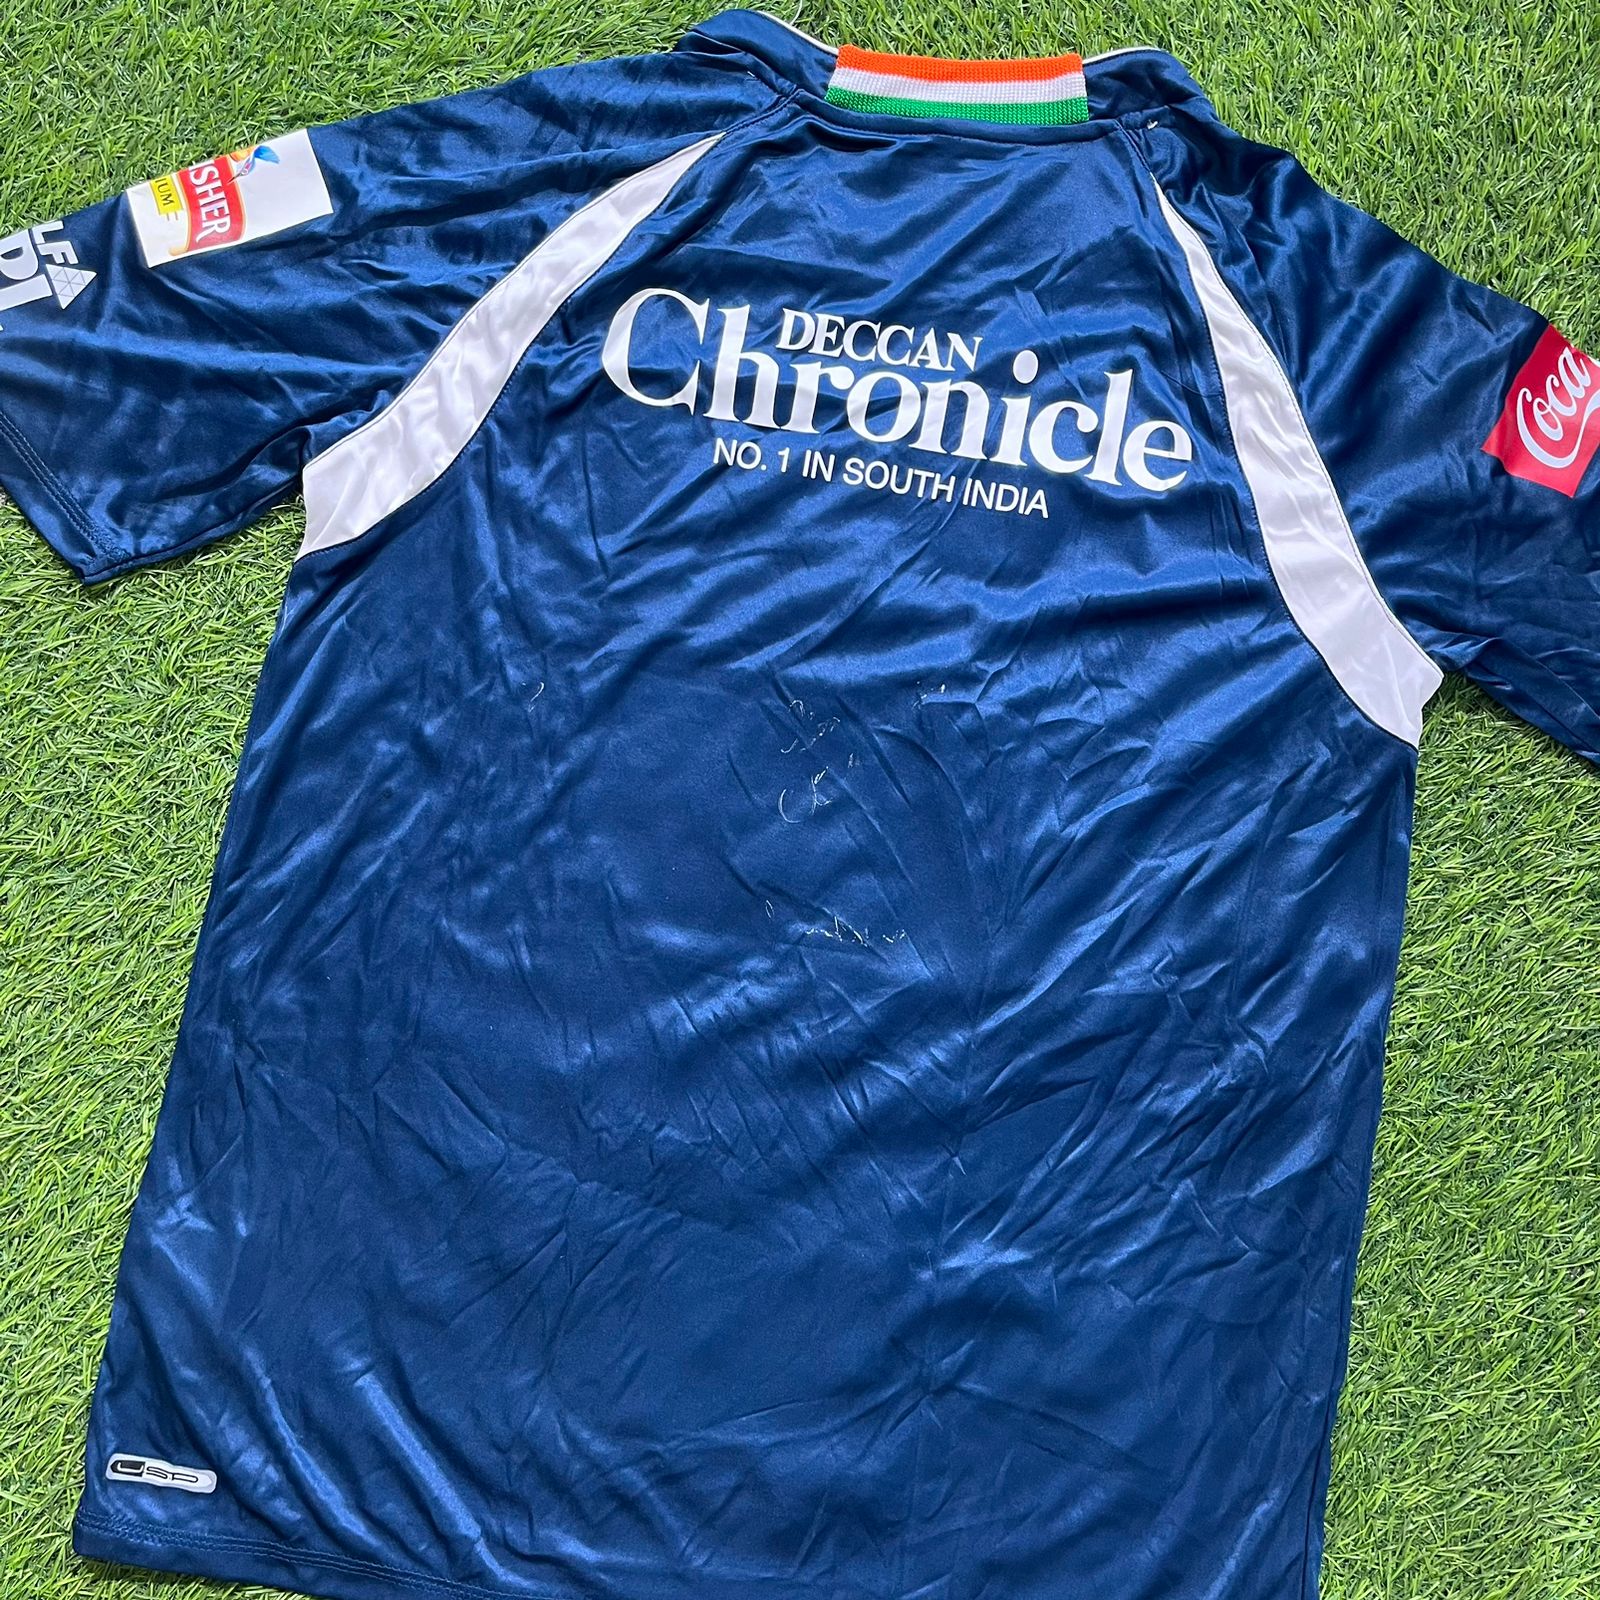 Did deccan chargers have the best IPL jersey ? | Instagram